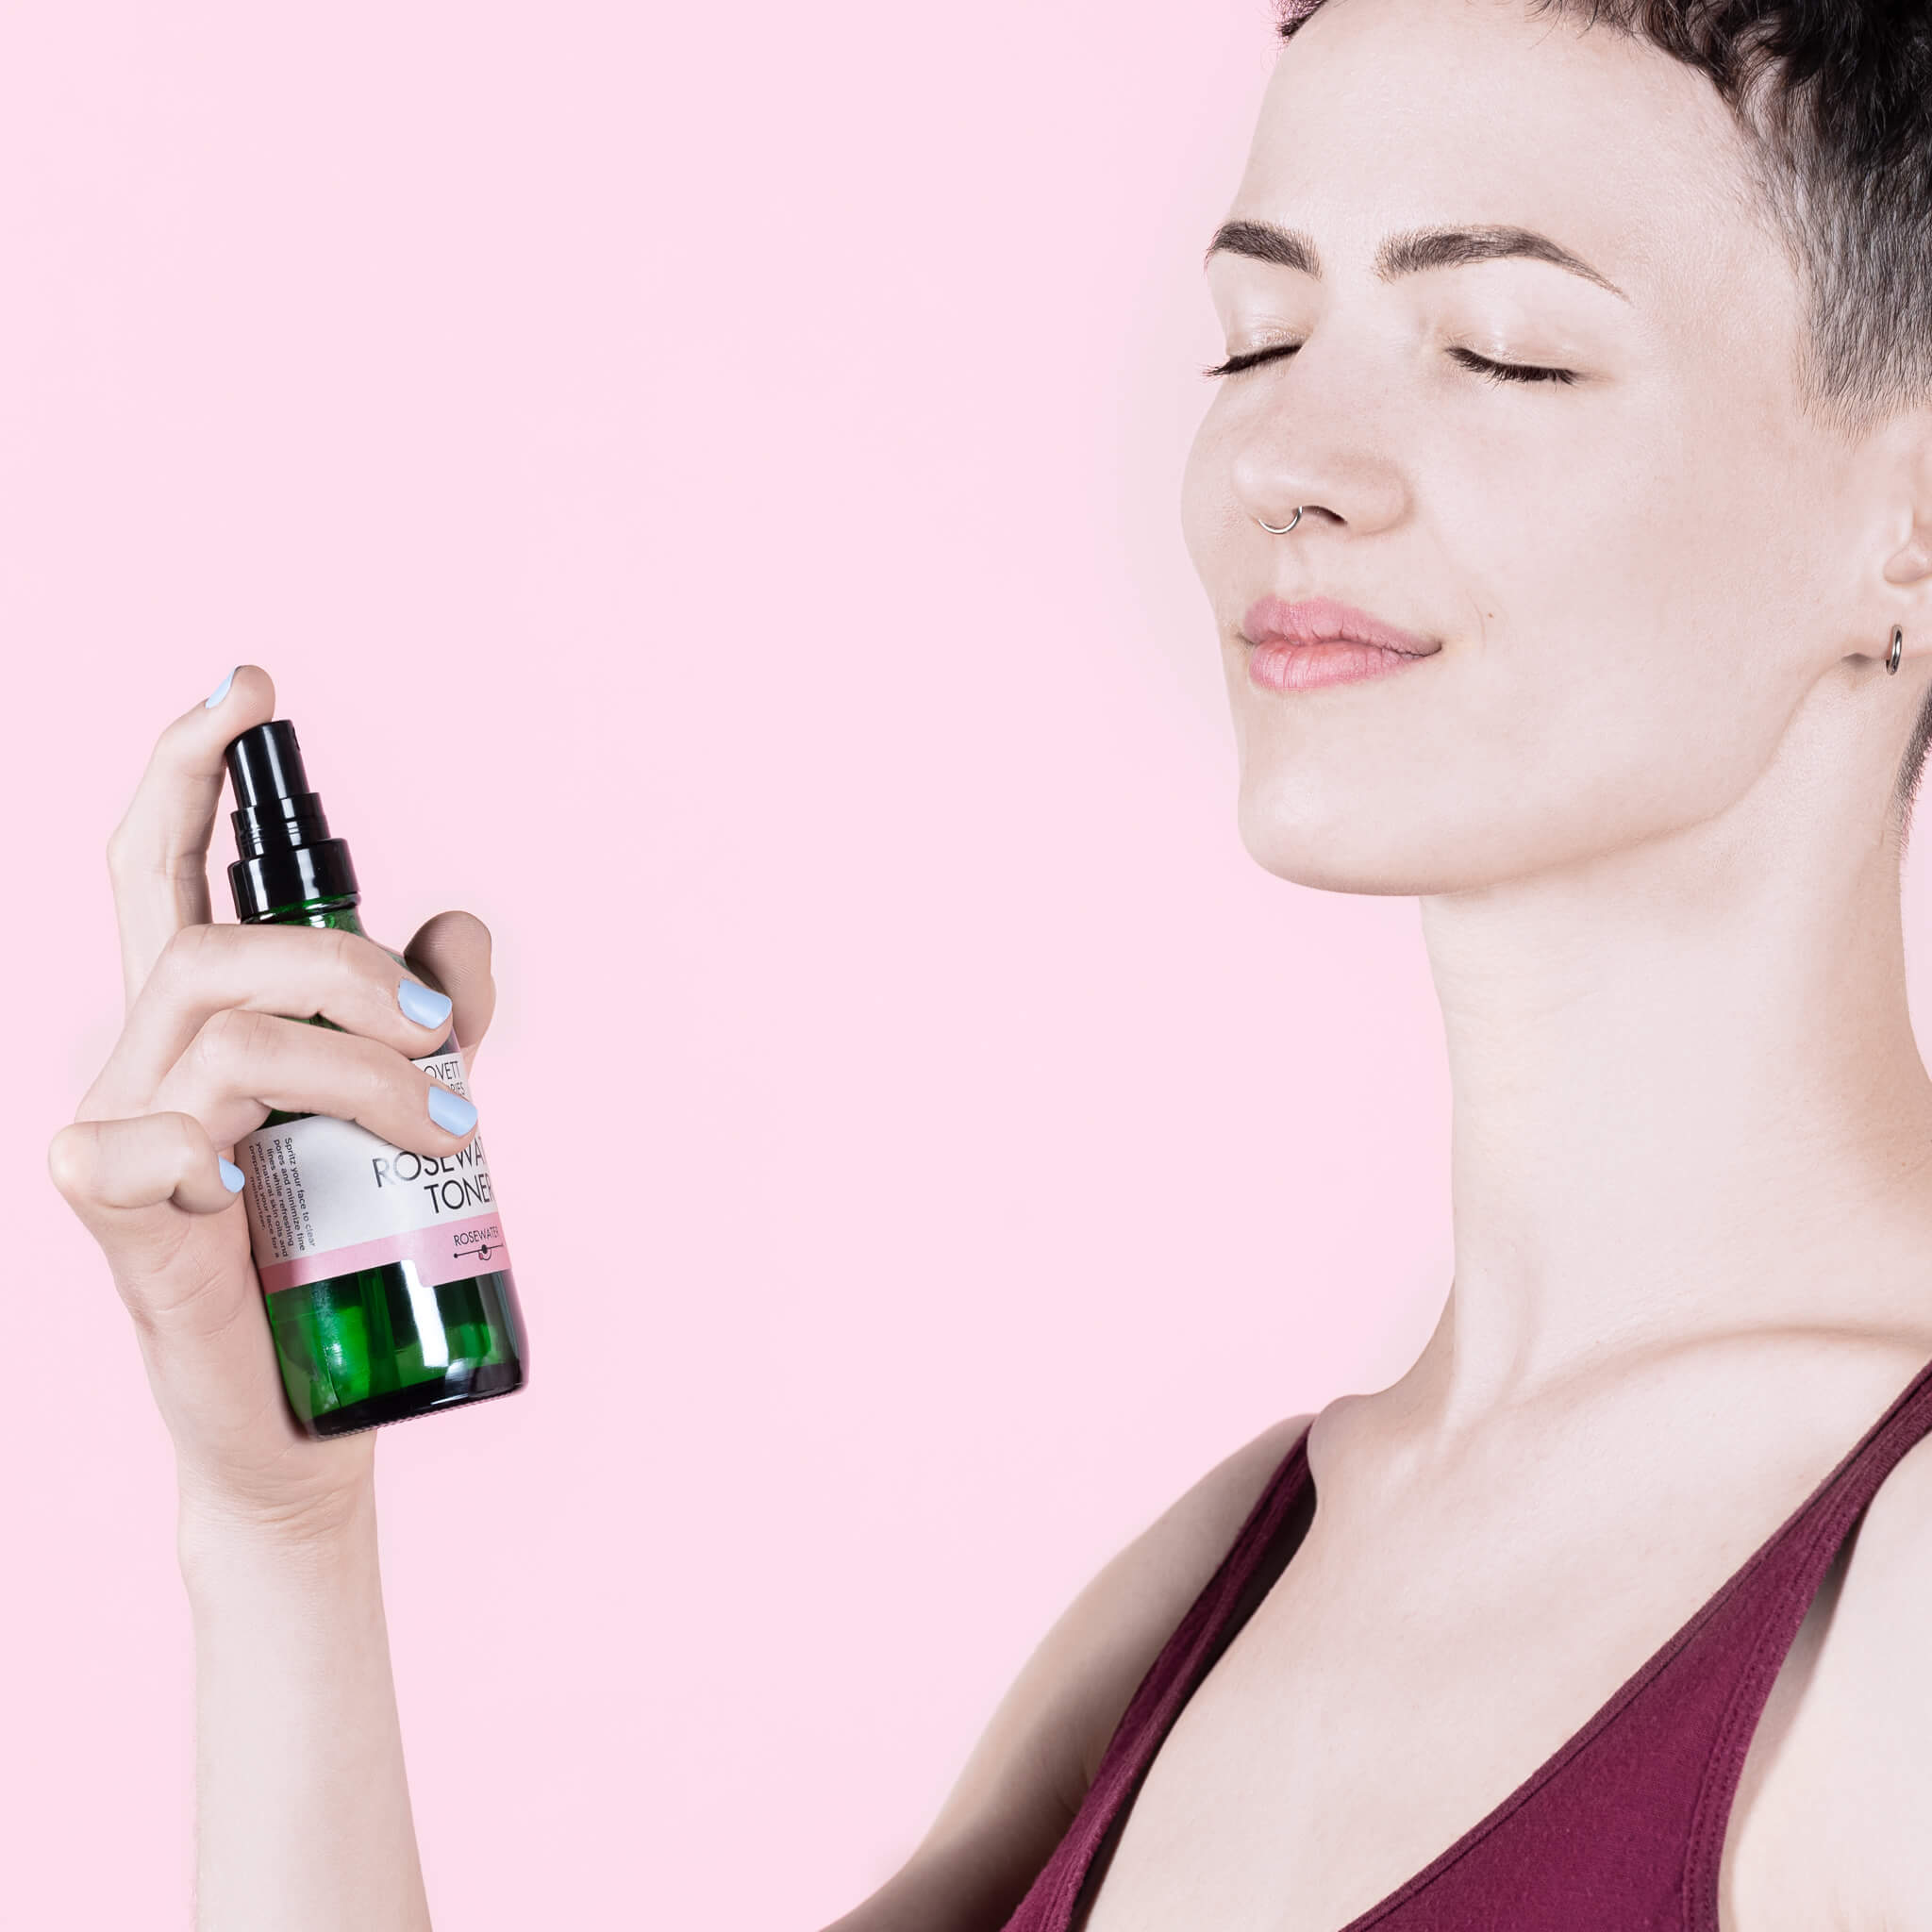 Kari spritzing her face with an all natural rosewater toner in a zerowaste glass bottle. 